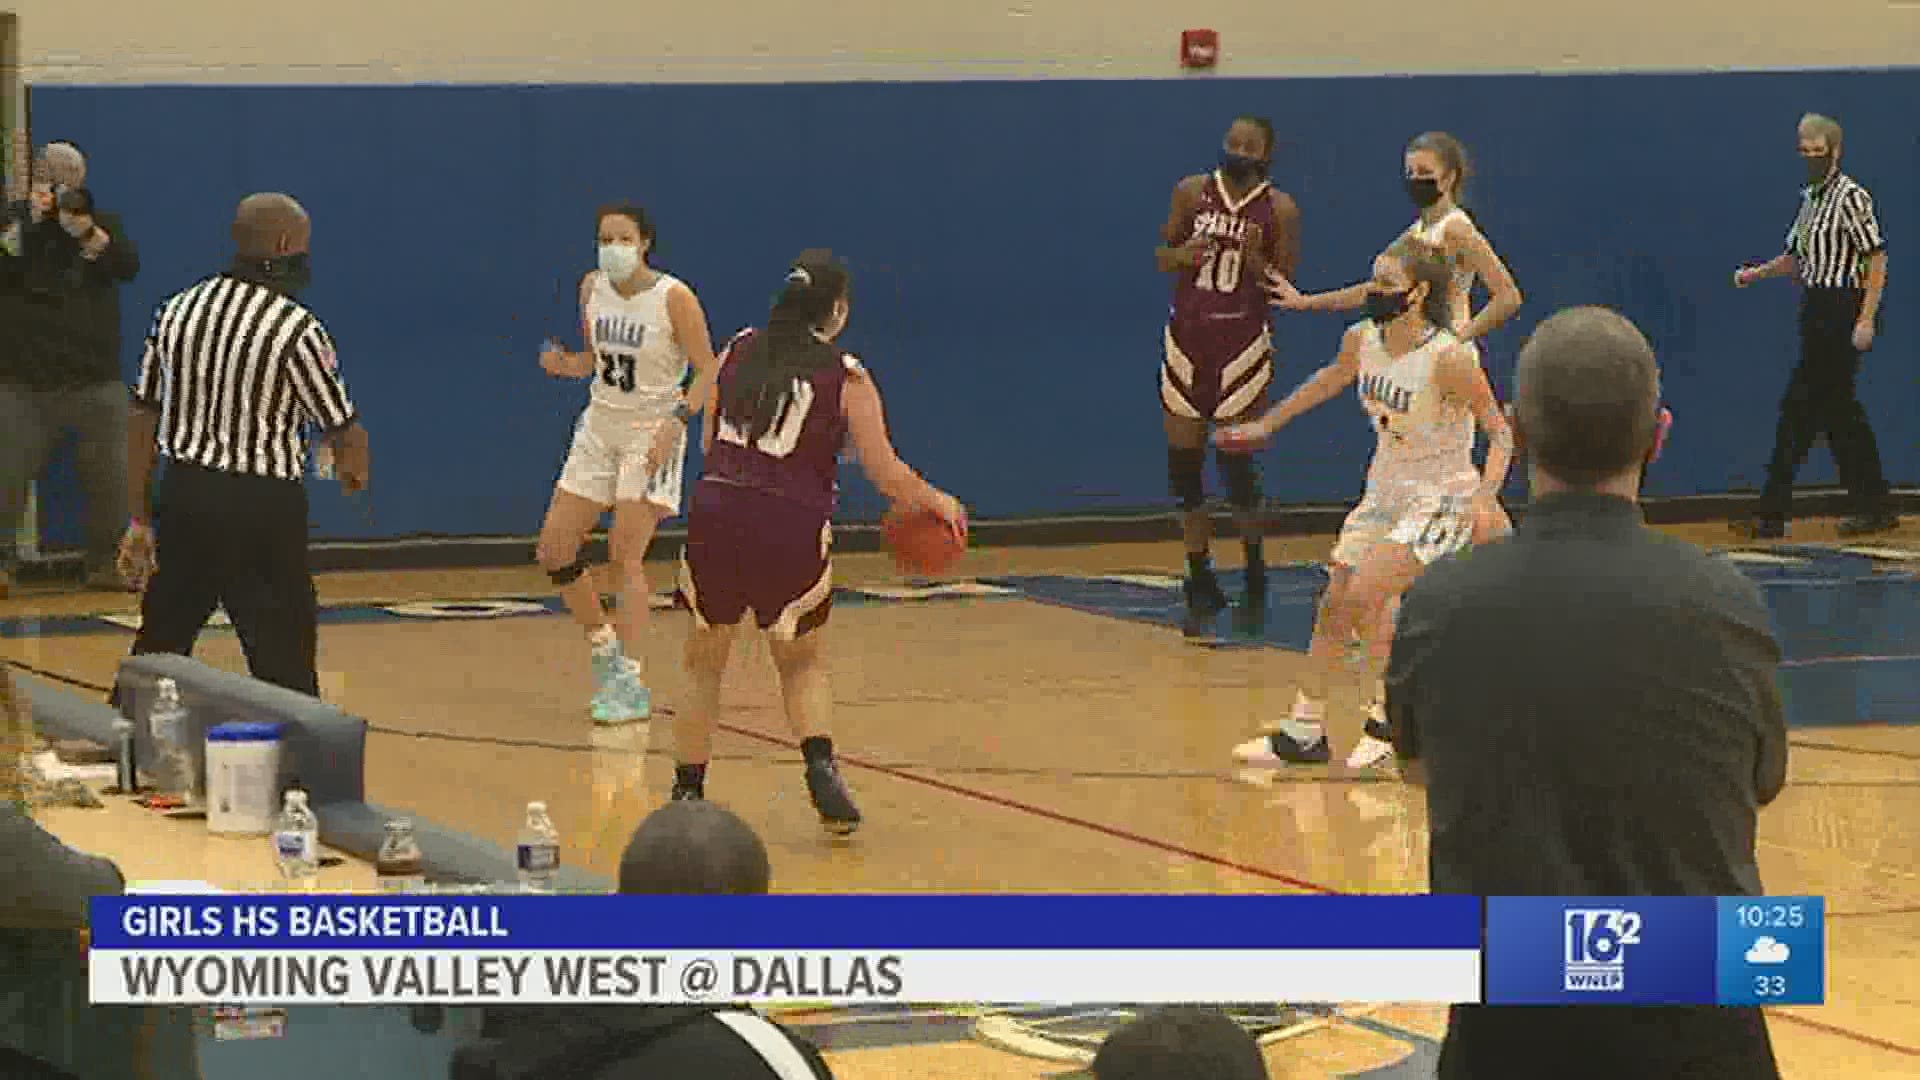 Wyoming Valley West girls basketball dumped Dallas 47-28